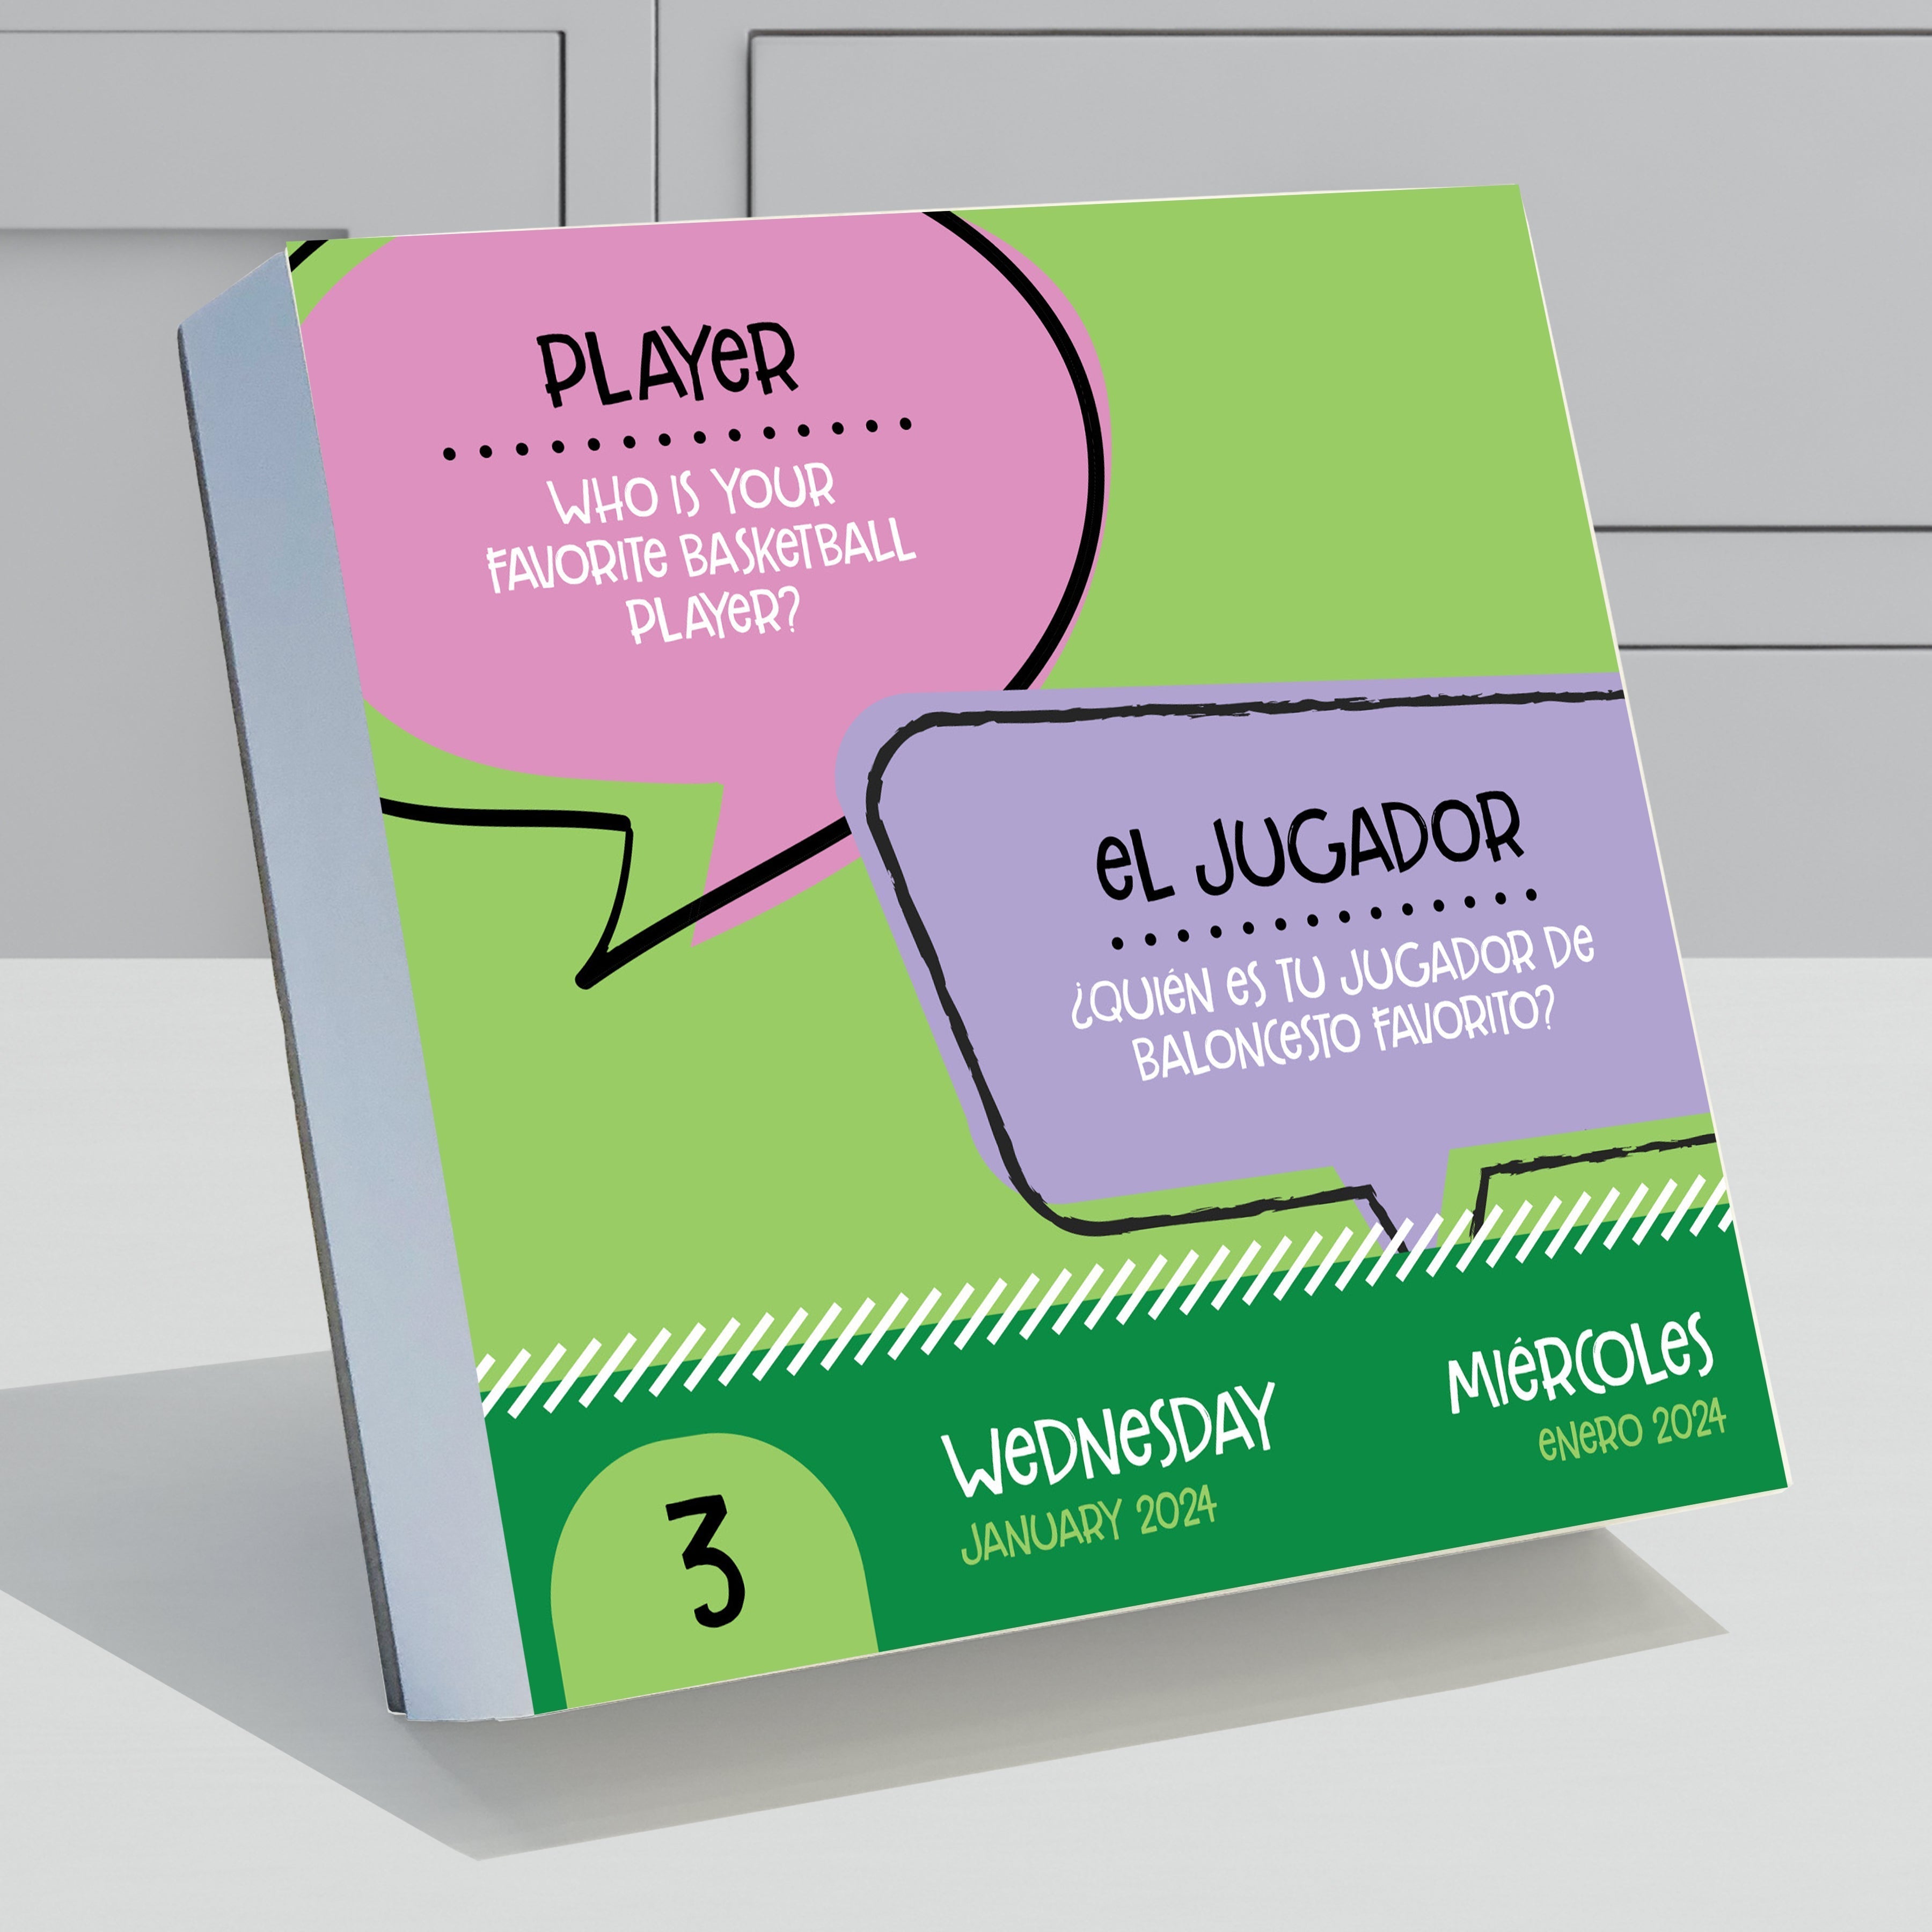 2024 Spanish Words - Daily Boxed Page-A-Day  Calendar